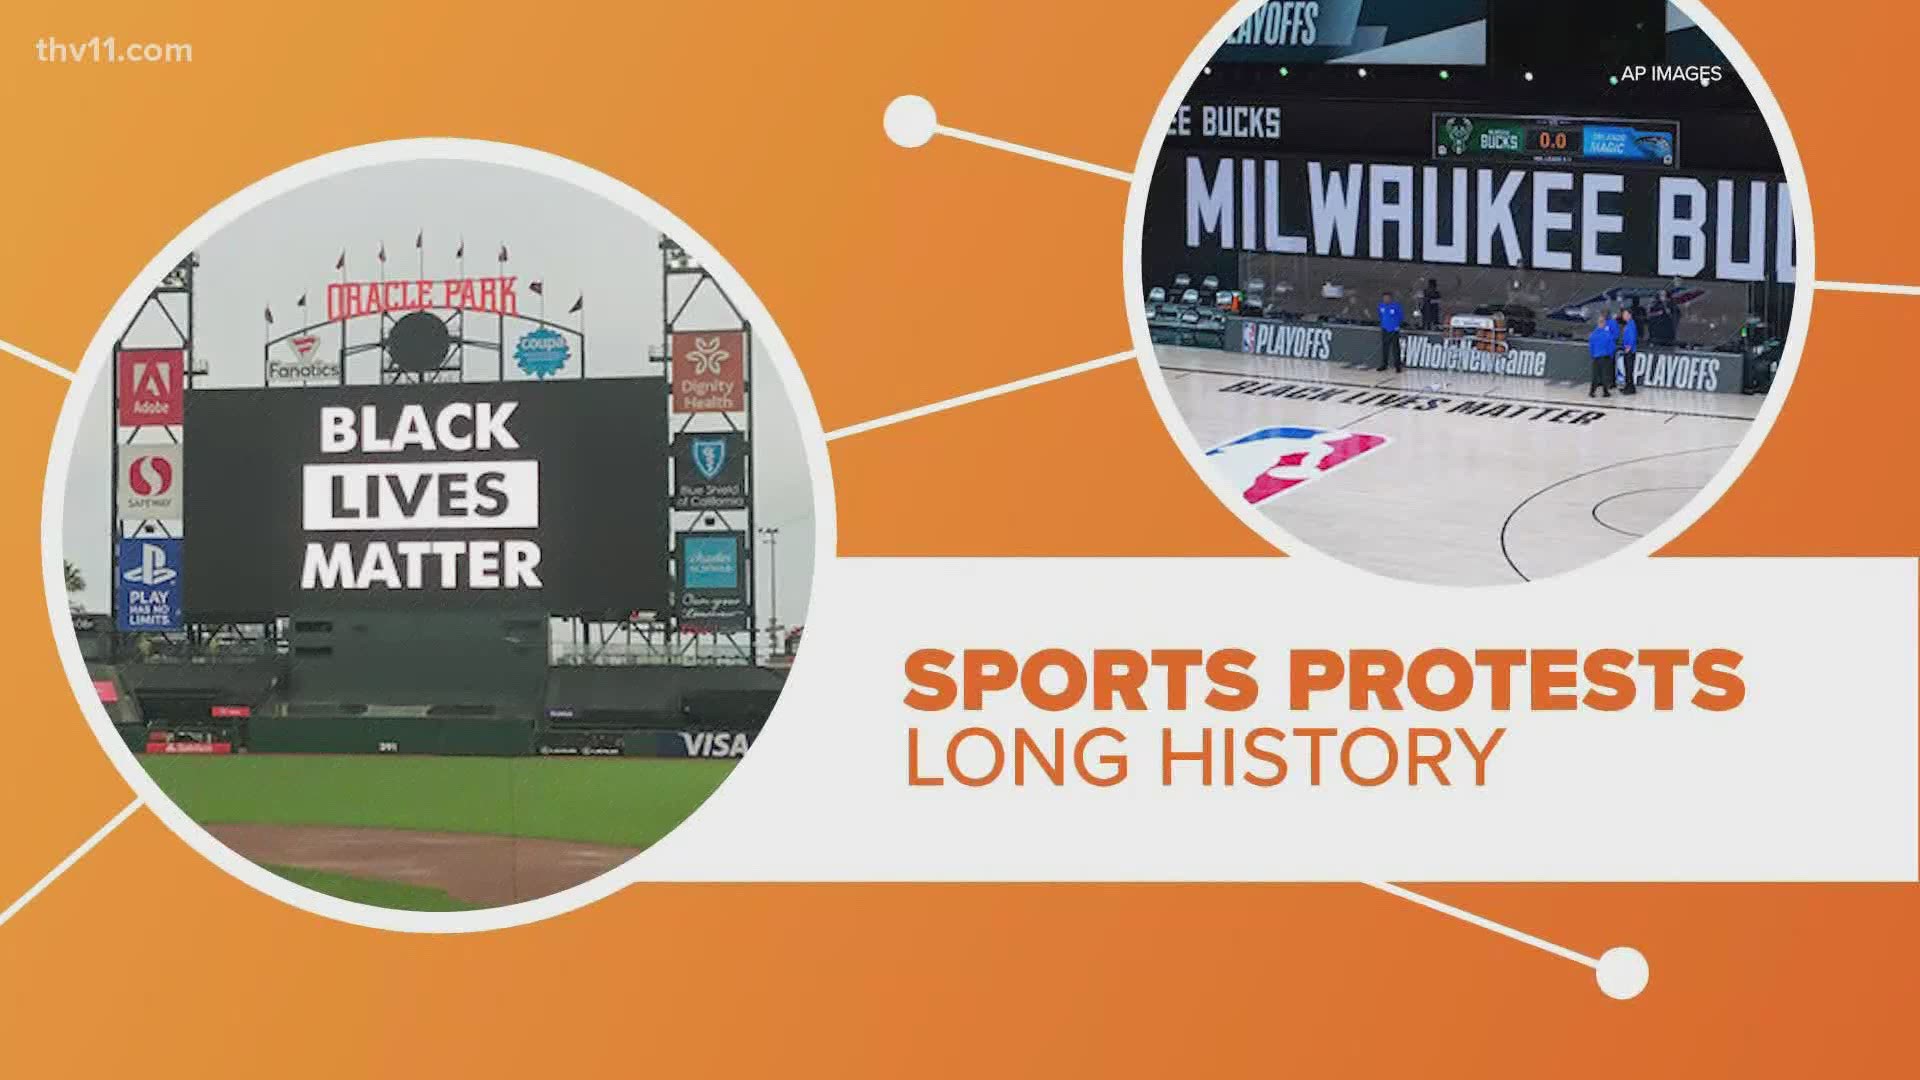 With sports protests still in the news, we're taking a closer look at these events which aren't new to 2020.